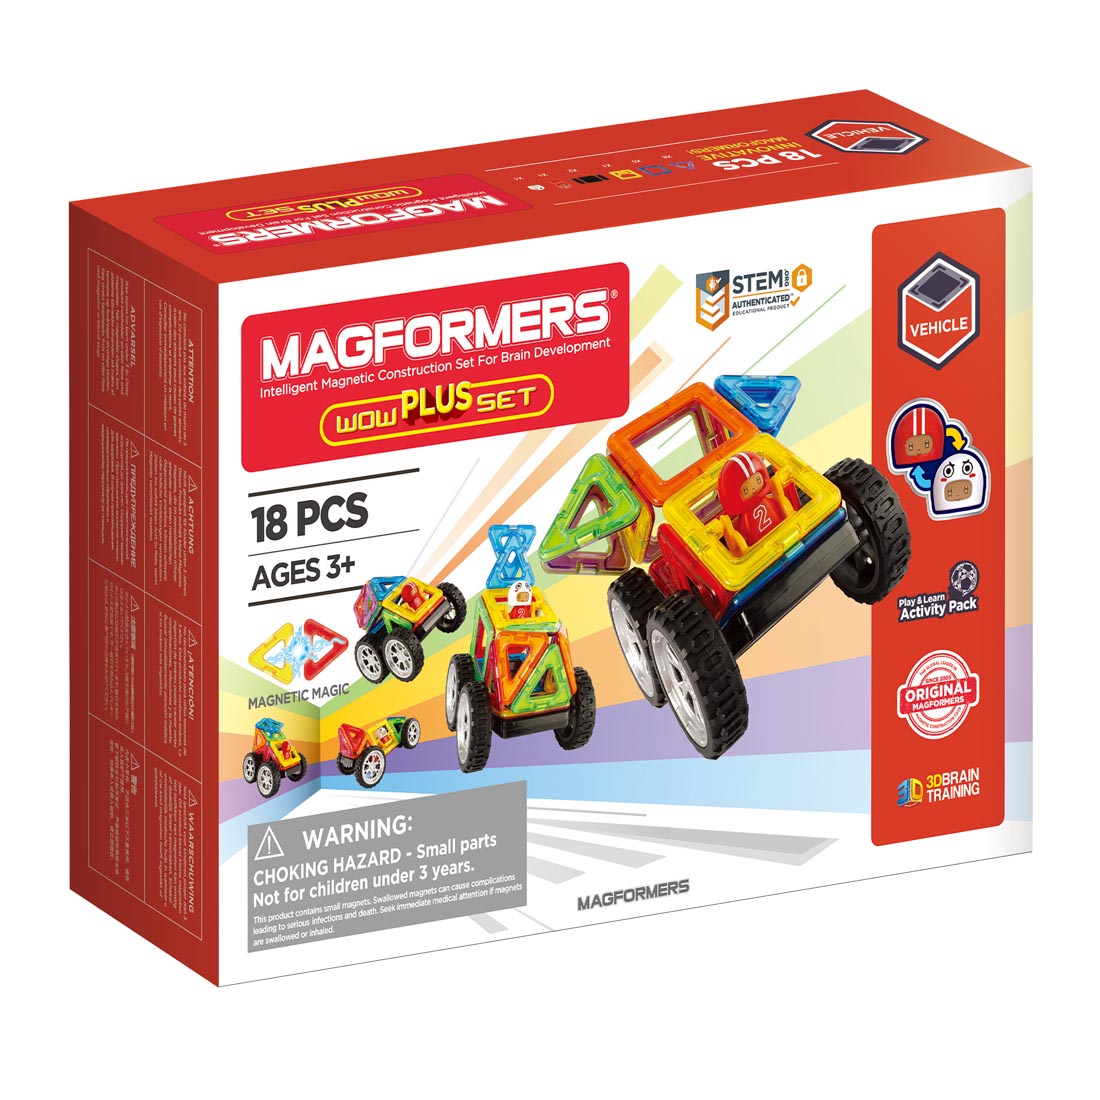 box for the Magformers 18-Piece WOW Plus Set